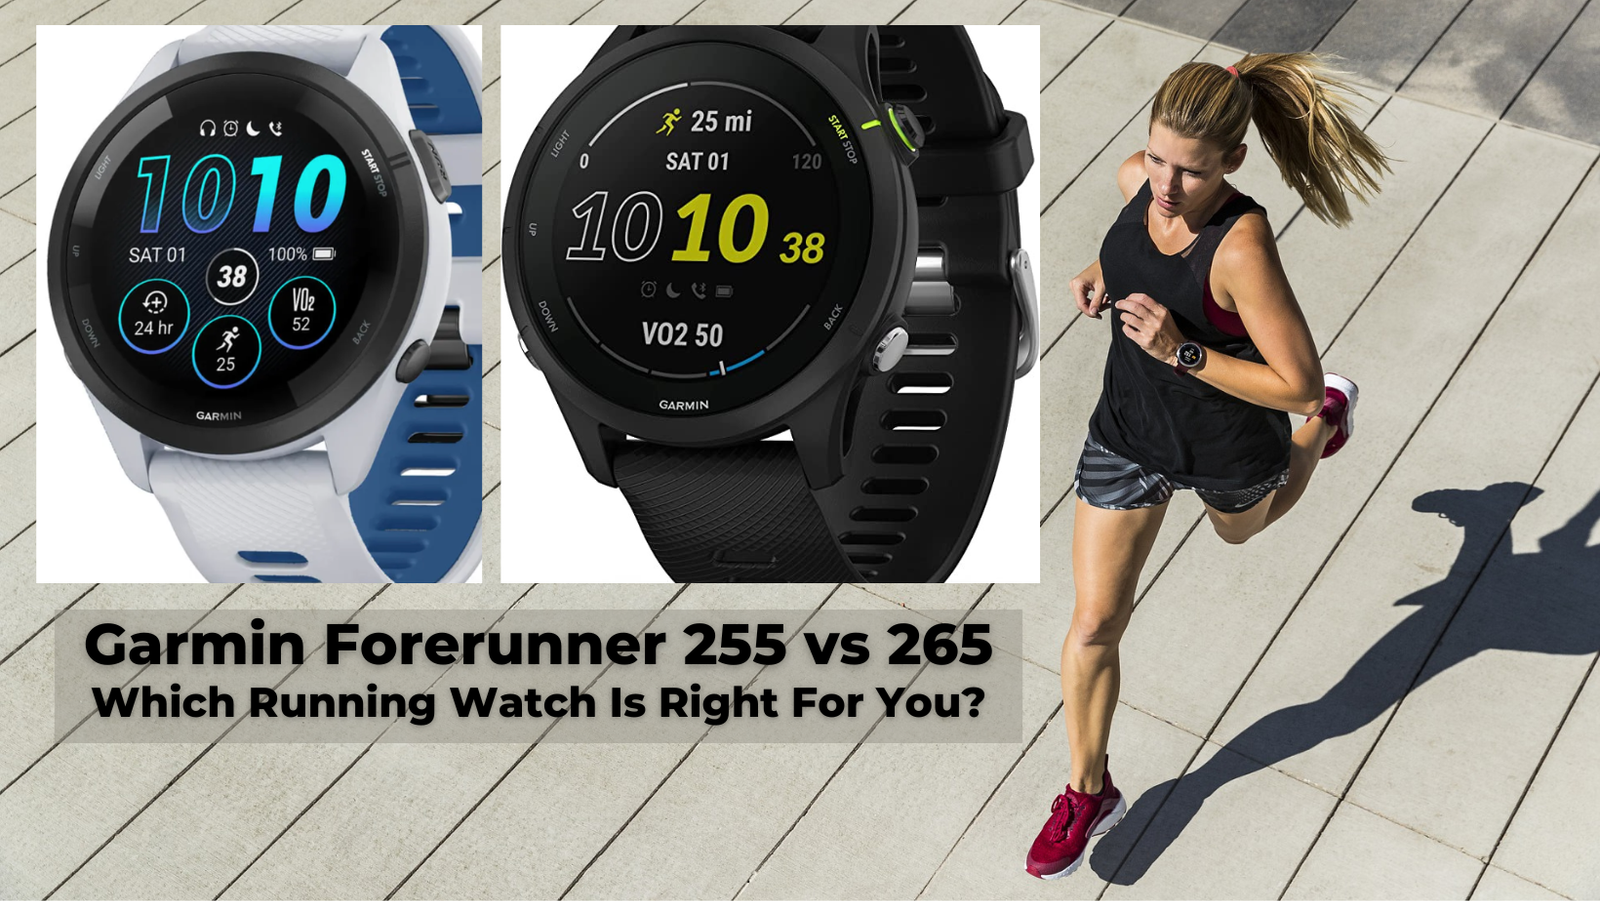 Garmin Forerunner 265 vs 255 vs 245: Do You Need the Newest Watch?